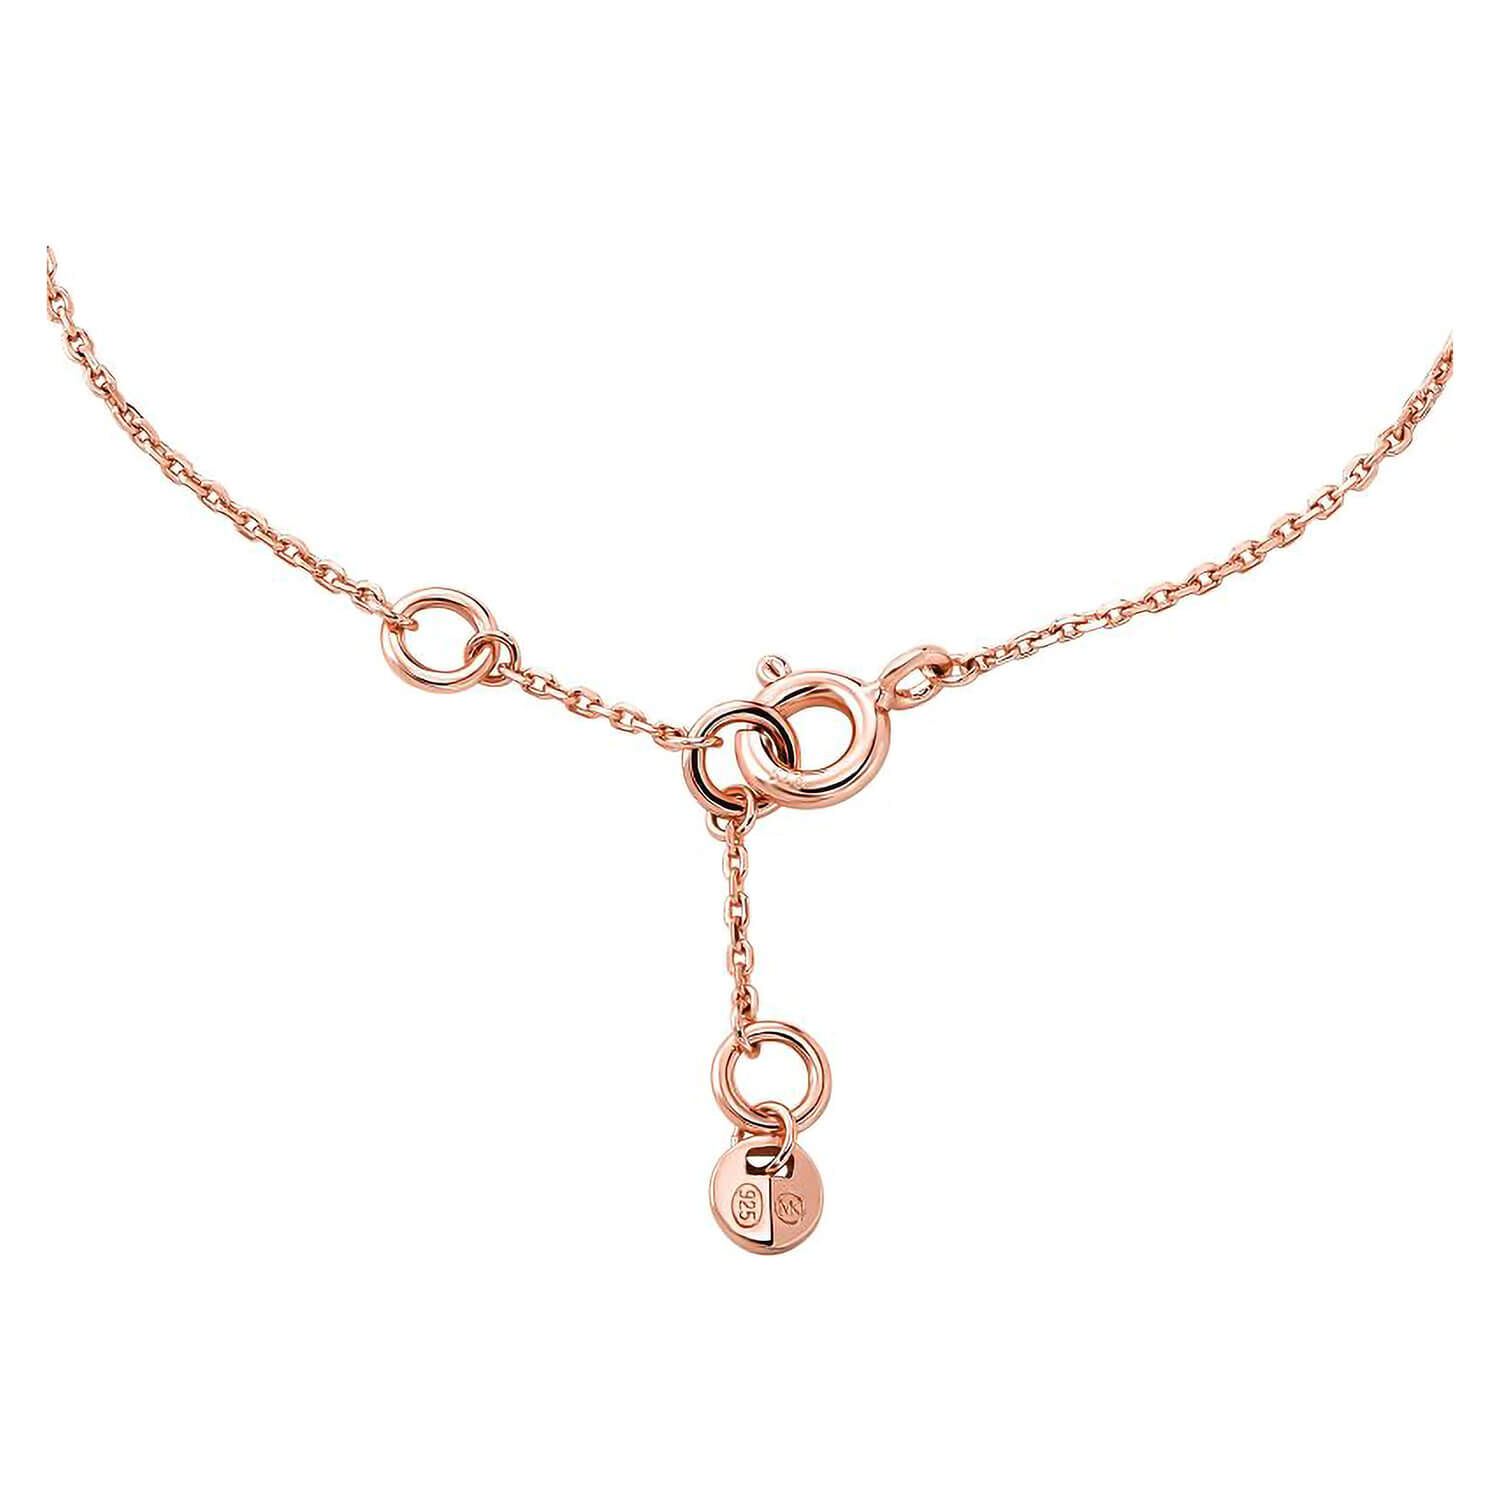 Michael Kors Pave Heart Necklace Discount  tabsonscom 1692635174